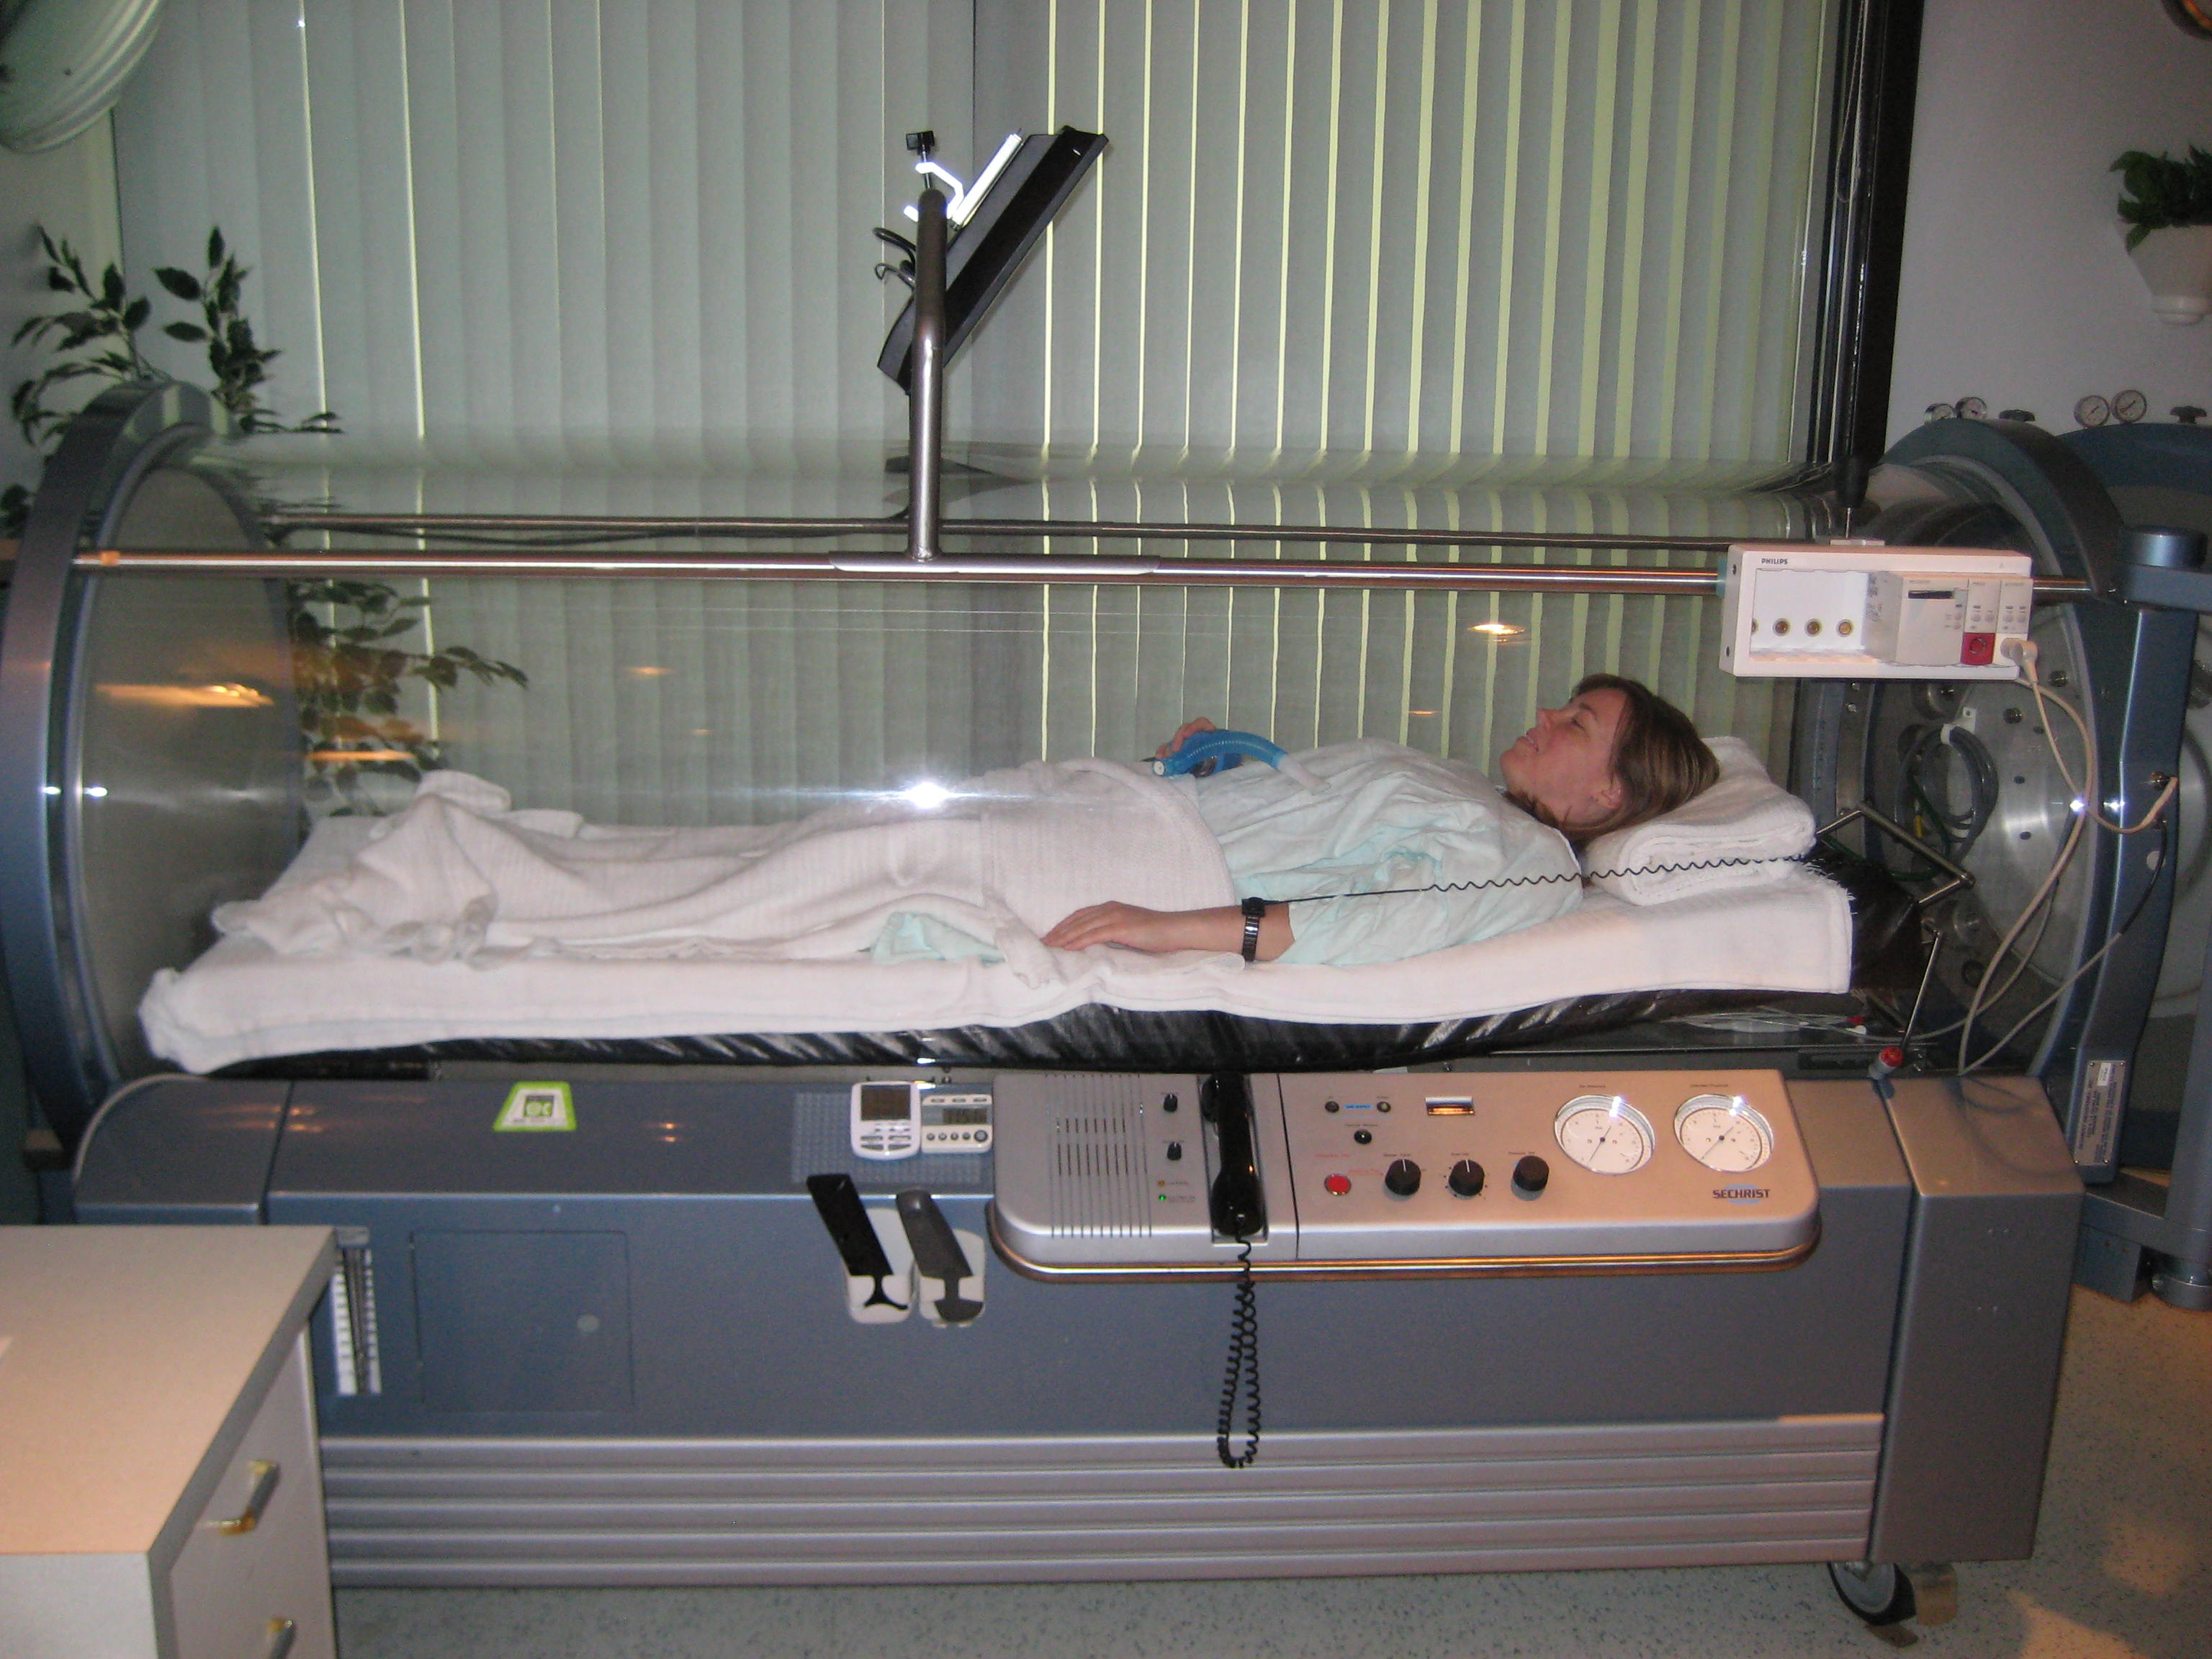 What Is Hyperbaric Therapy Used For?